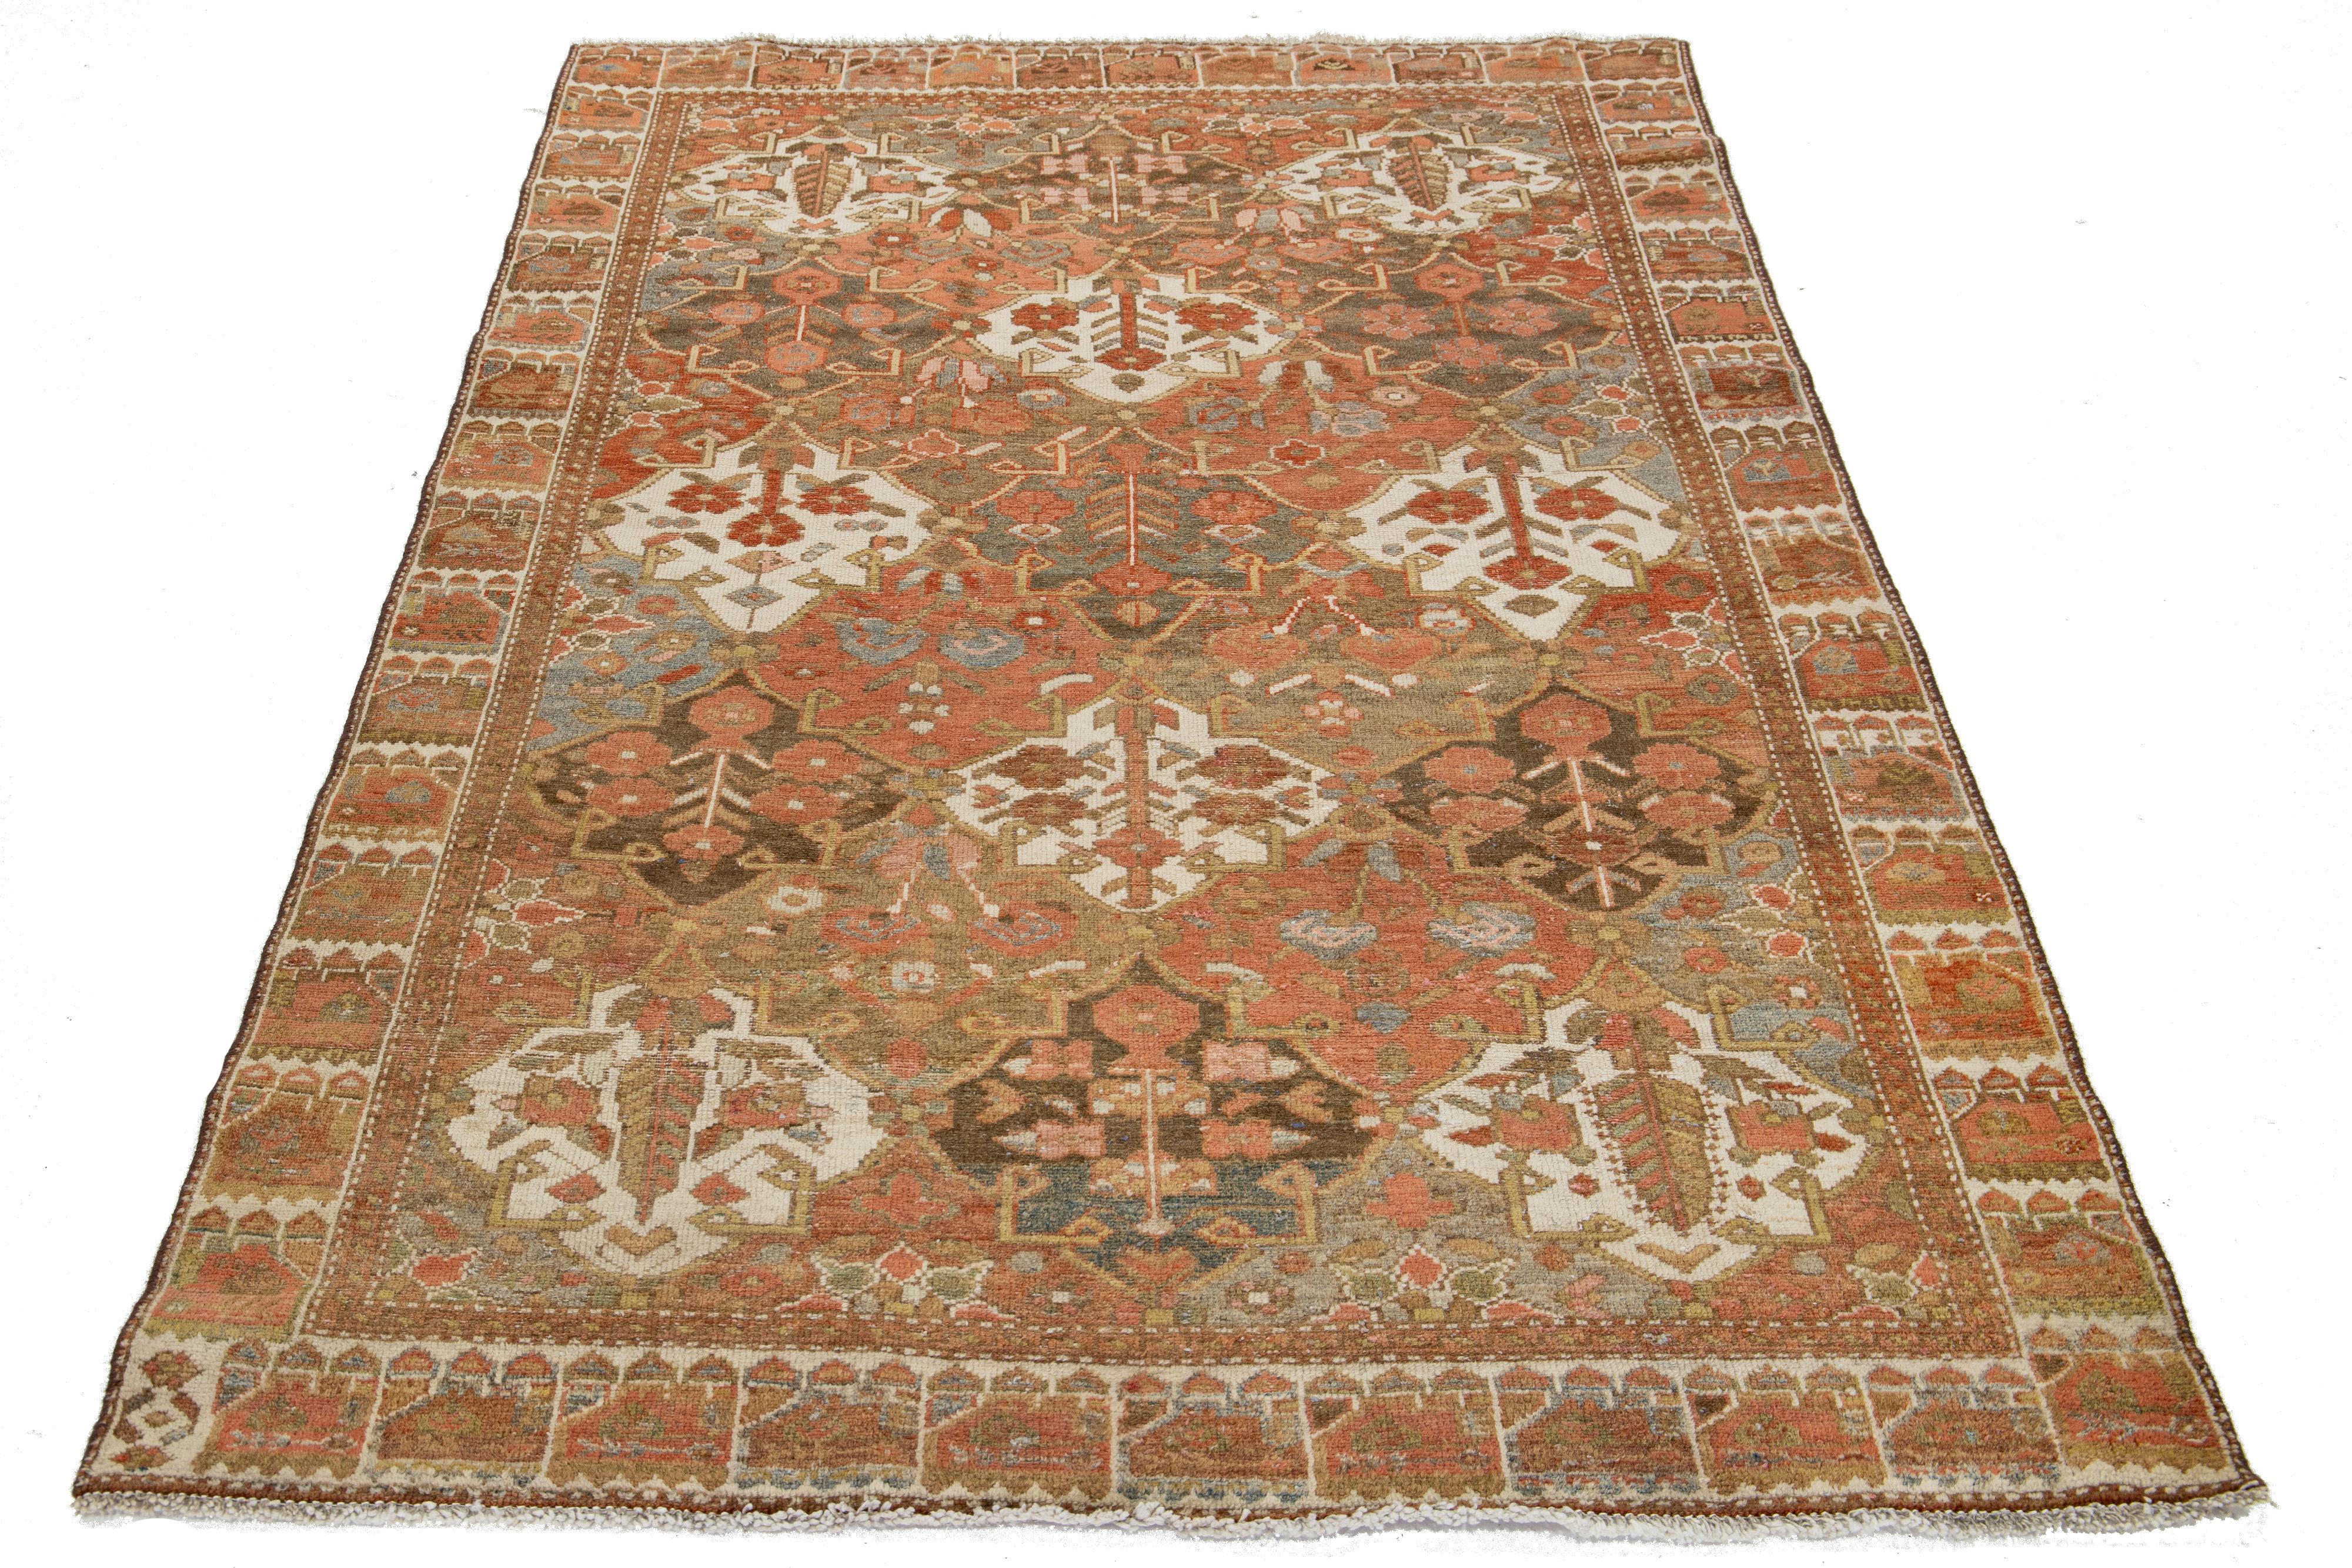 This stunning hand-knotted wool rug showcases a classic Persian design with rust and blue color fields and gray, brown, and beige accents.

This rug measures 4'3